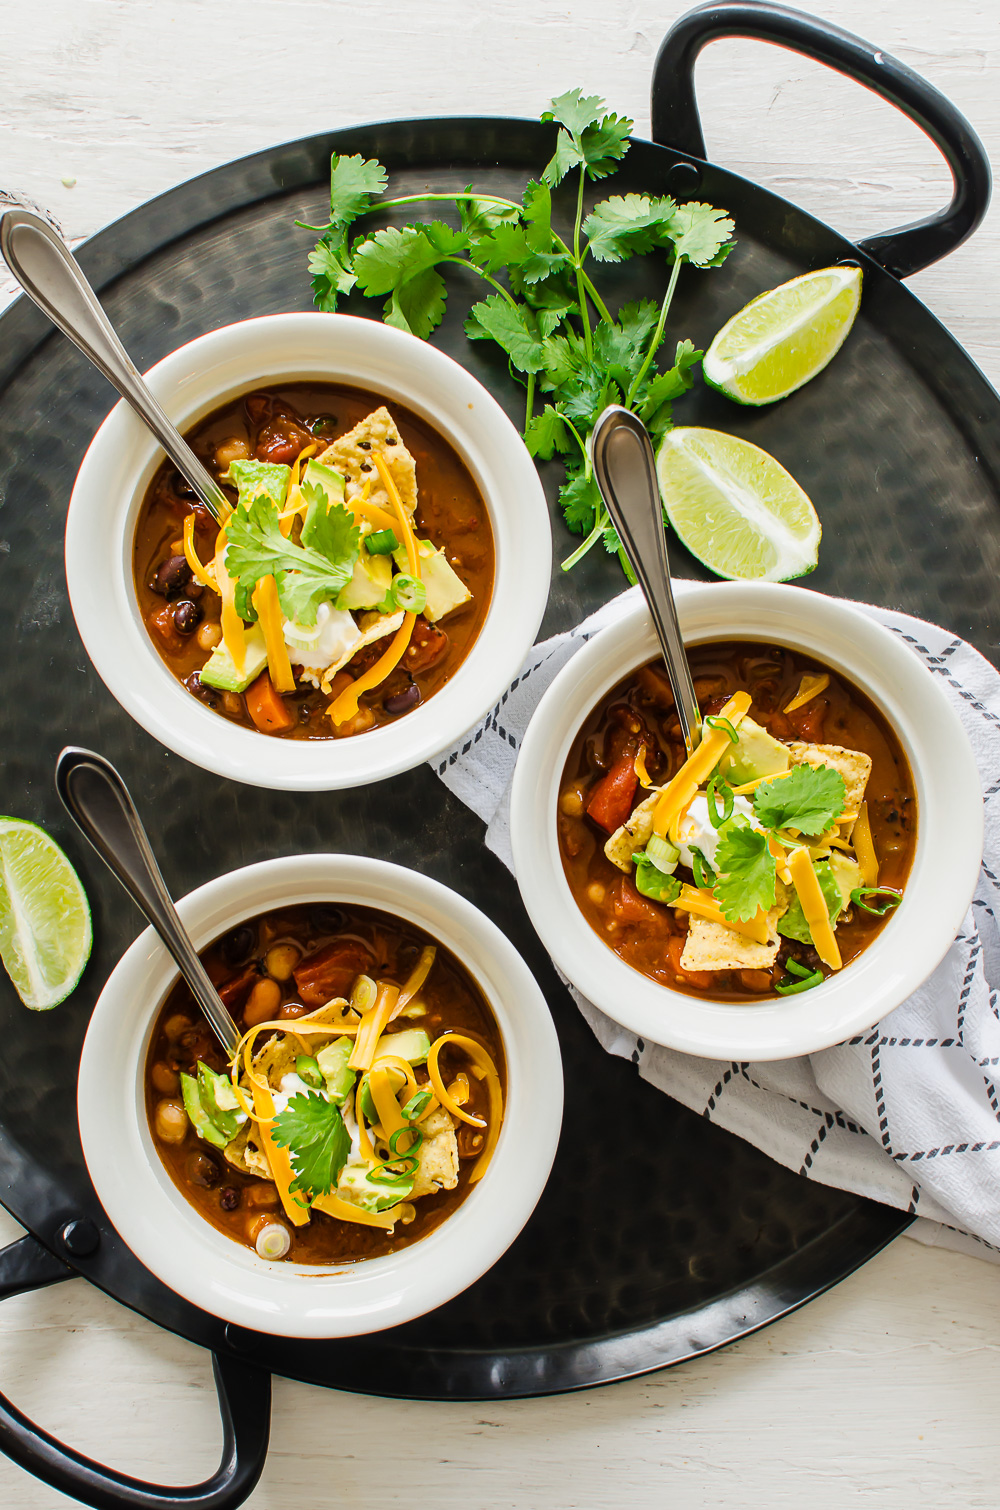 Three bowls of chili with toppings like tortilla chips, avocado, cilantro, lime wedges, and cheese.